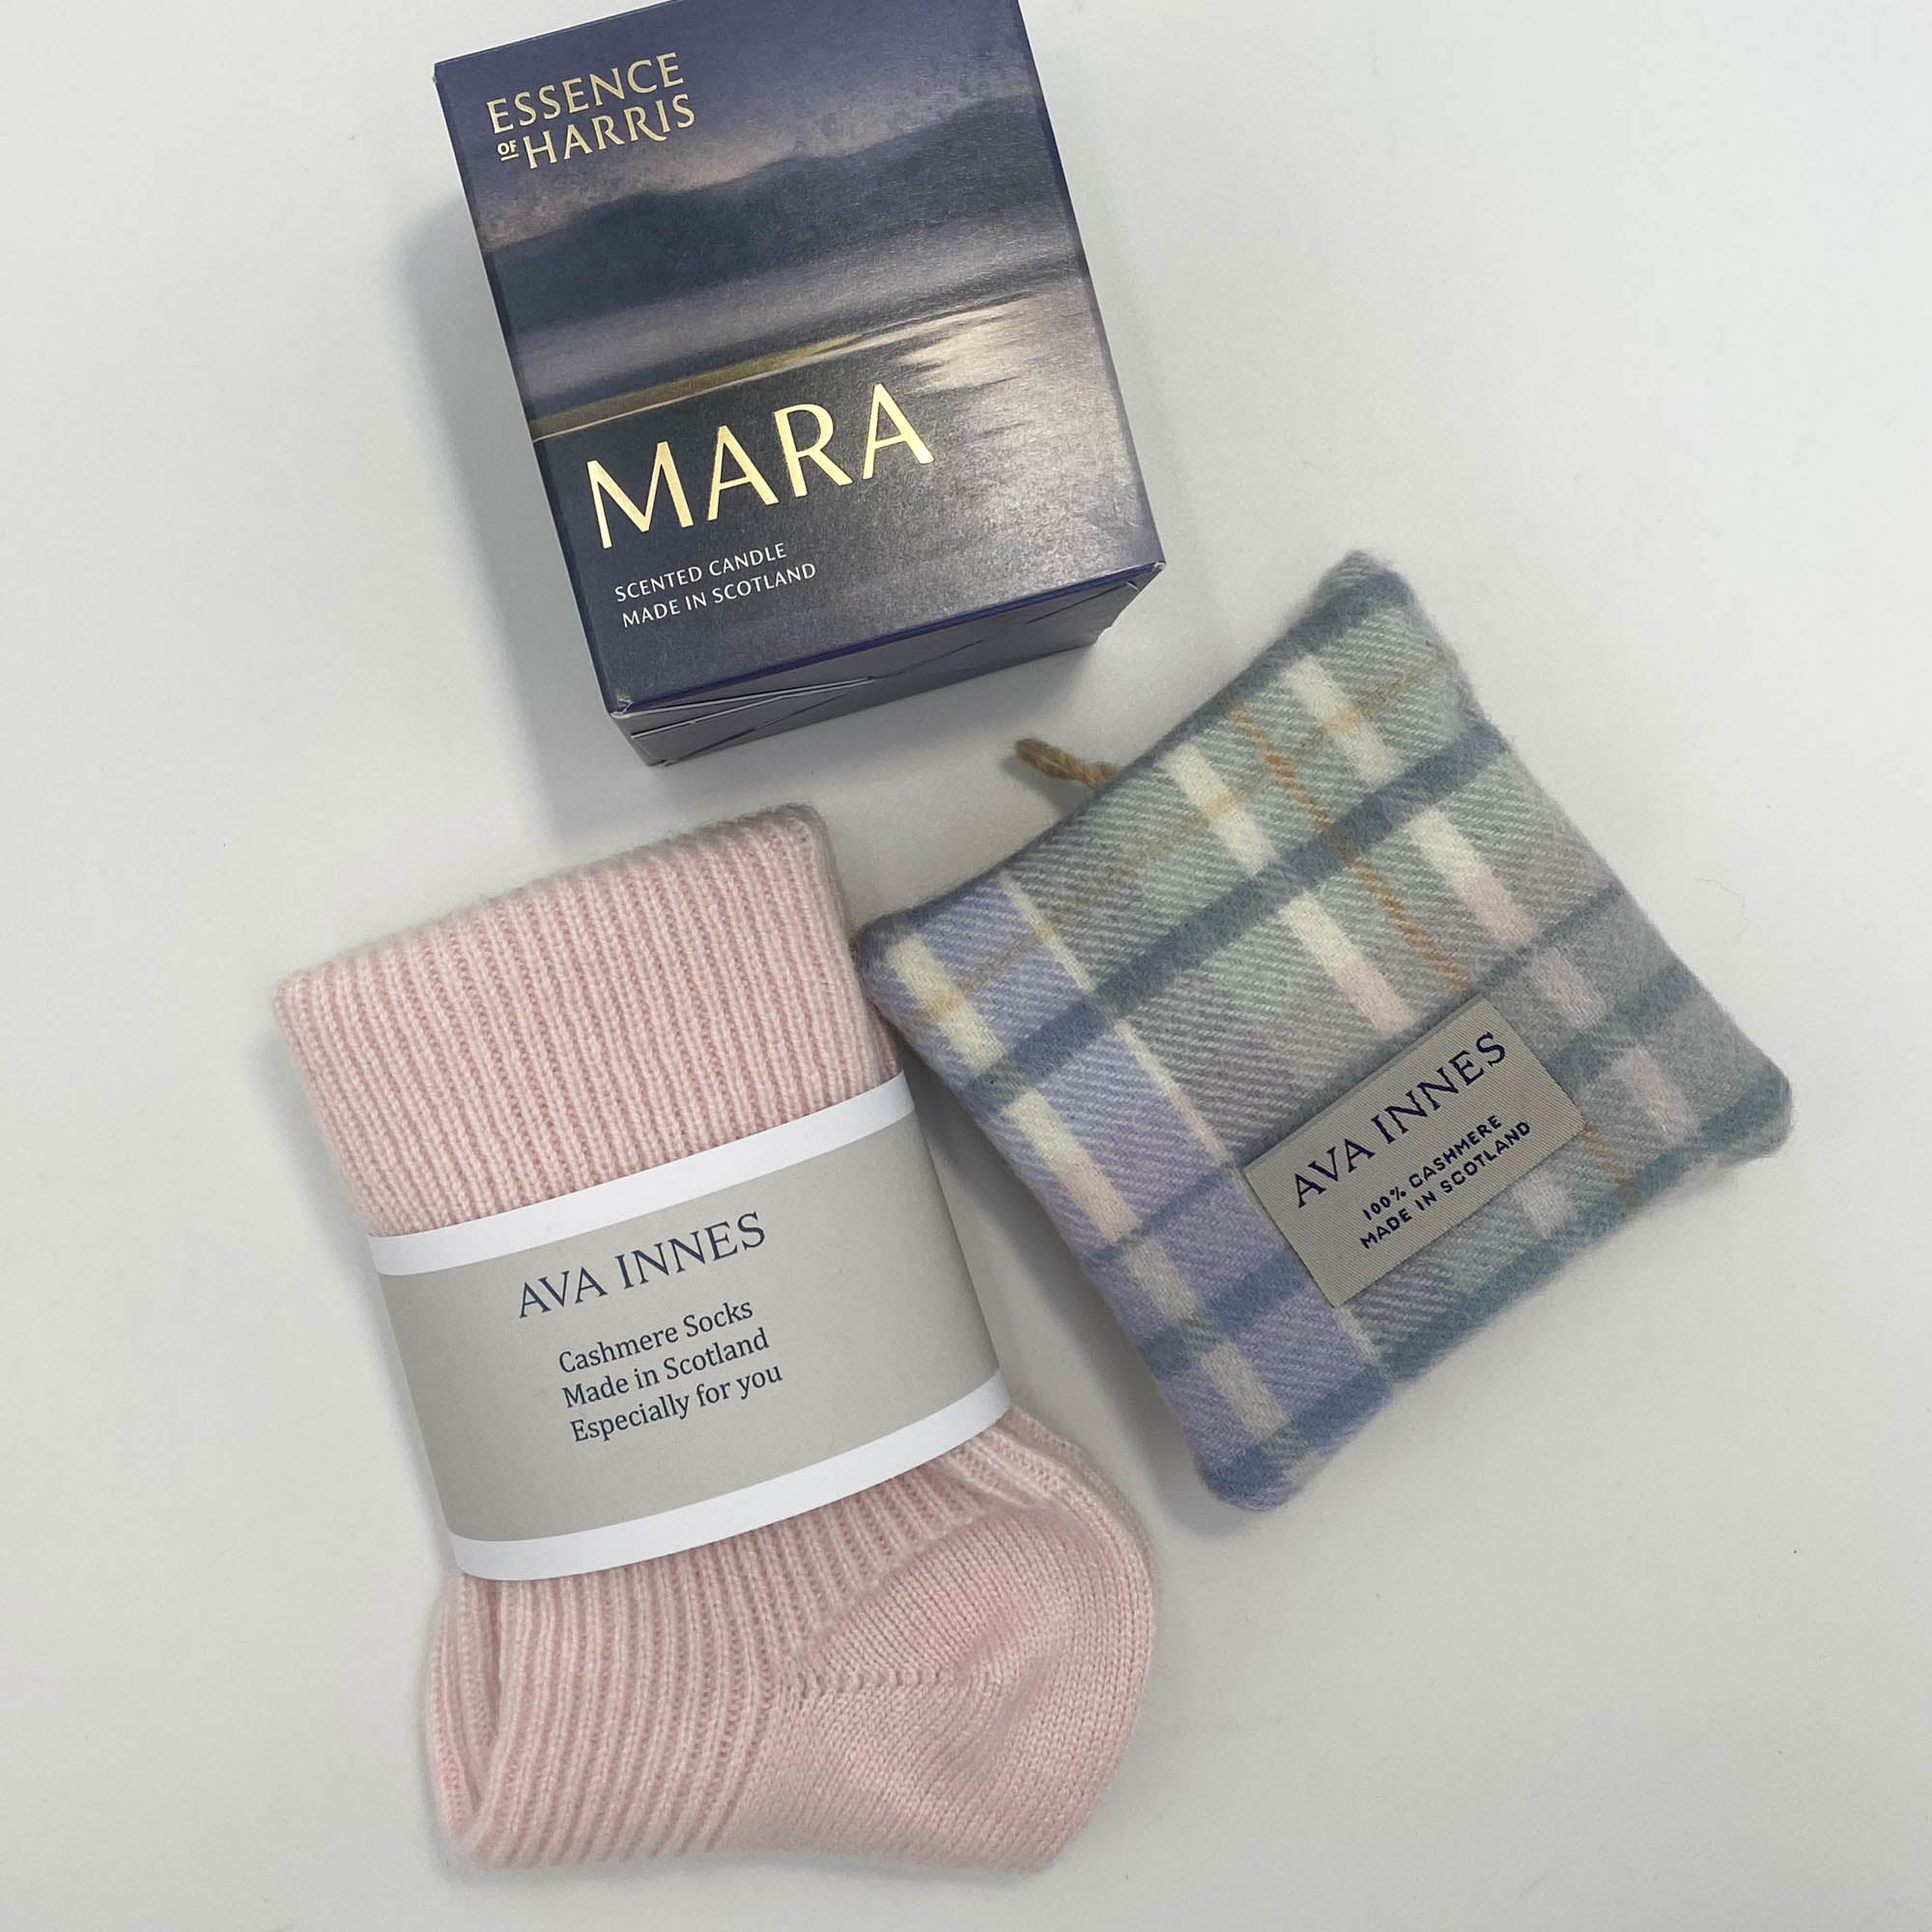 The Luxury Rest and Relax Cashmere Gift Box, Ava Innes